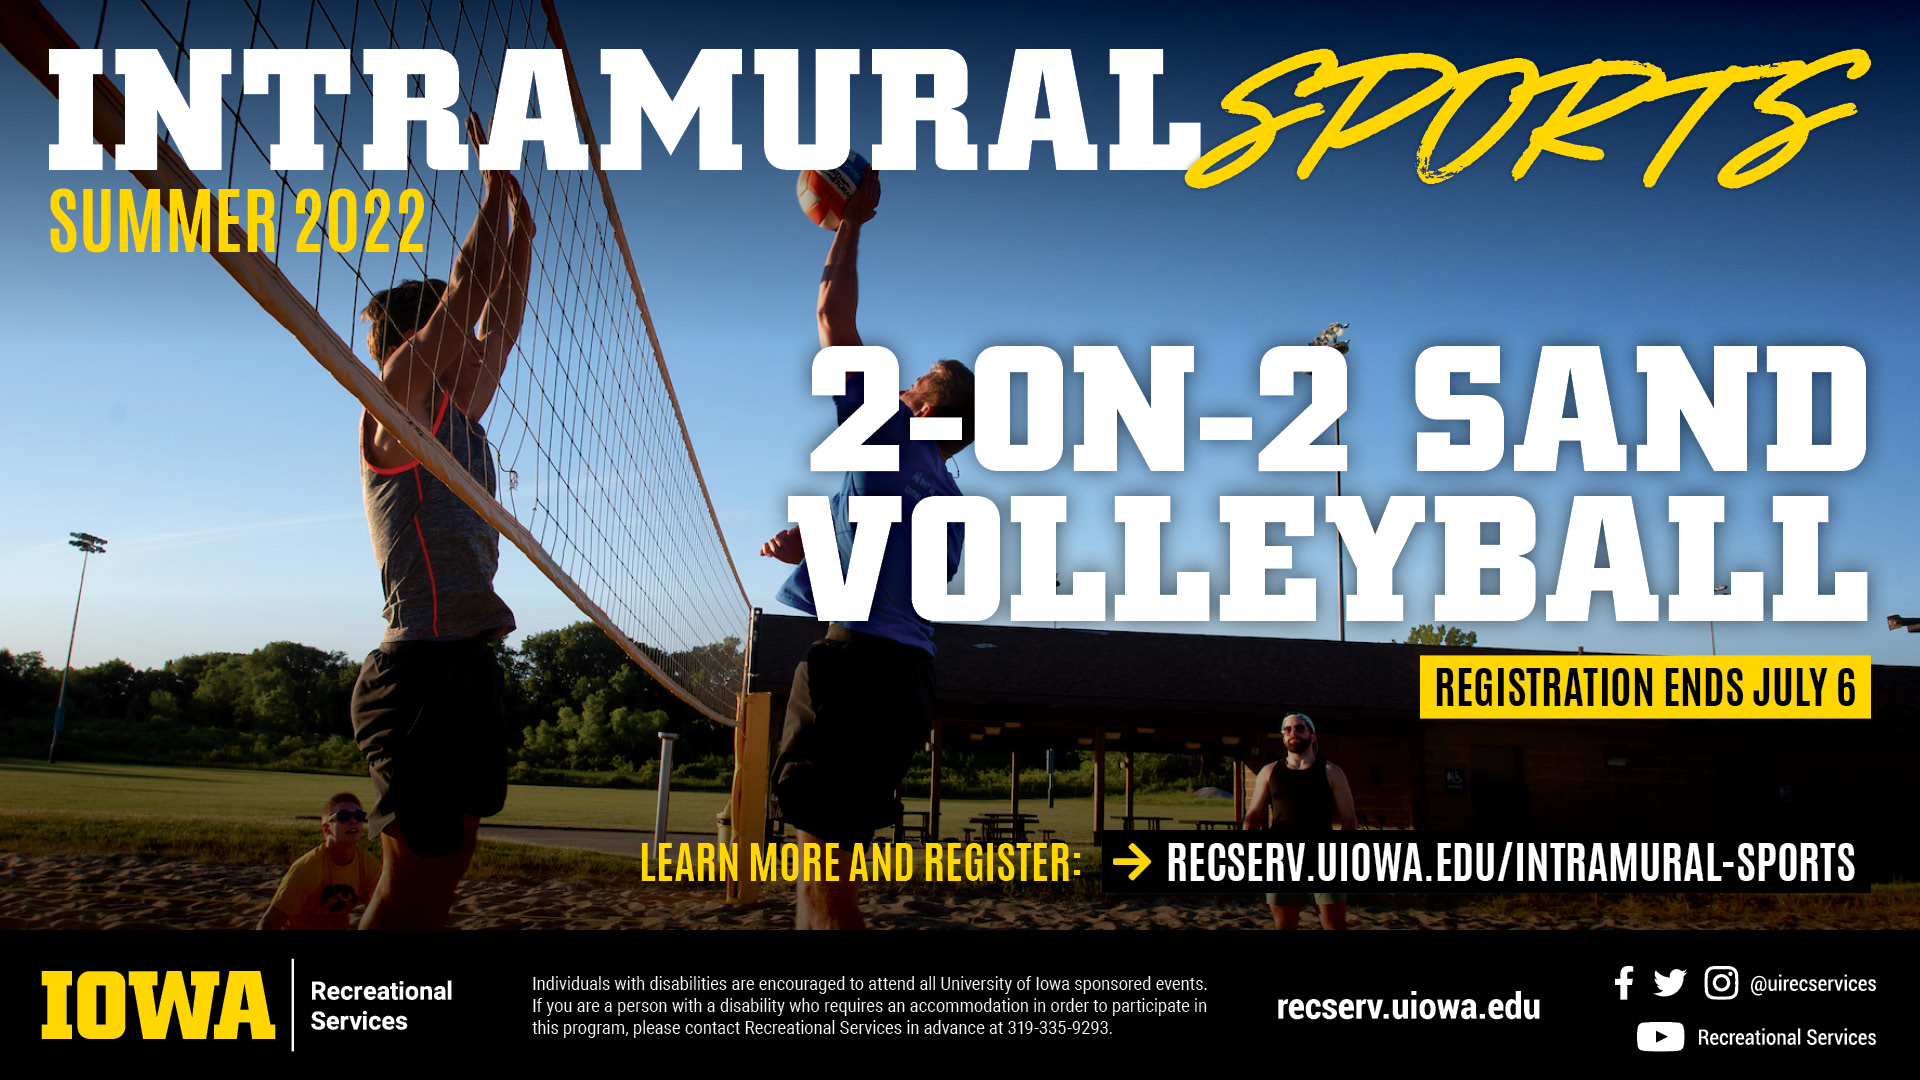 Summer 2022 Intramural 2 on 2 Sand Volleyball. Registration ends July 6. Learn more and register: recserv.uiowa.edu/intramural-sports